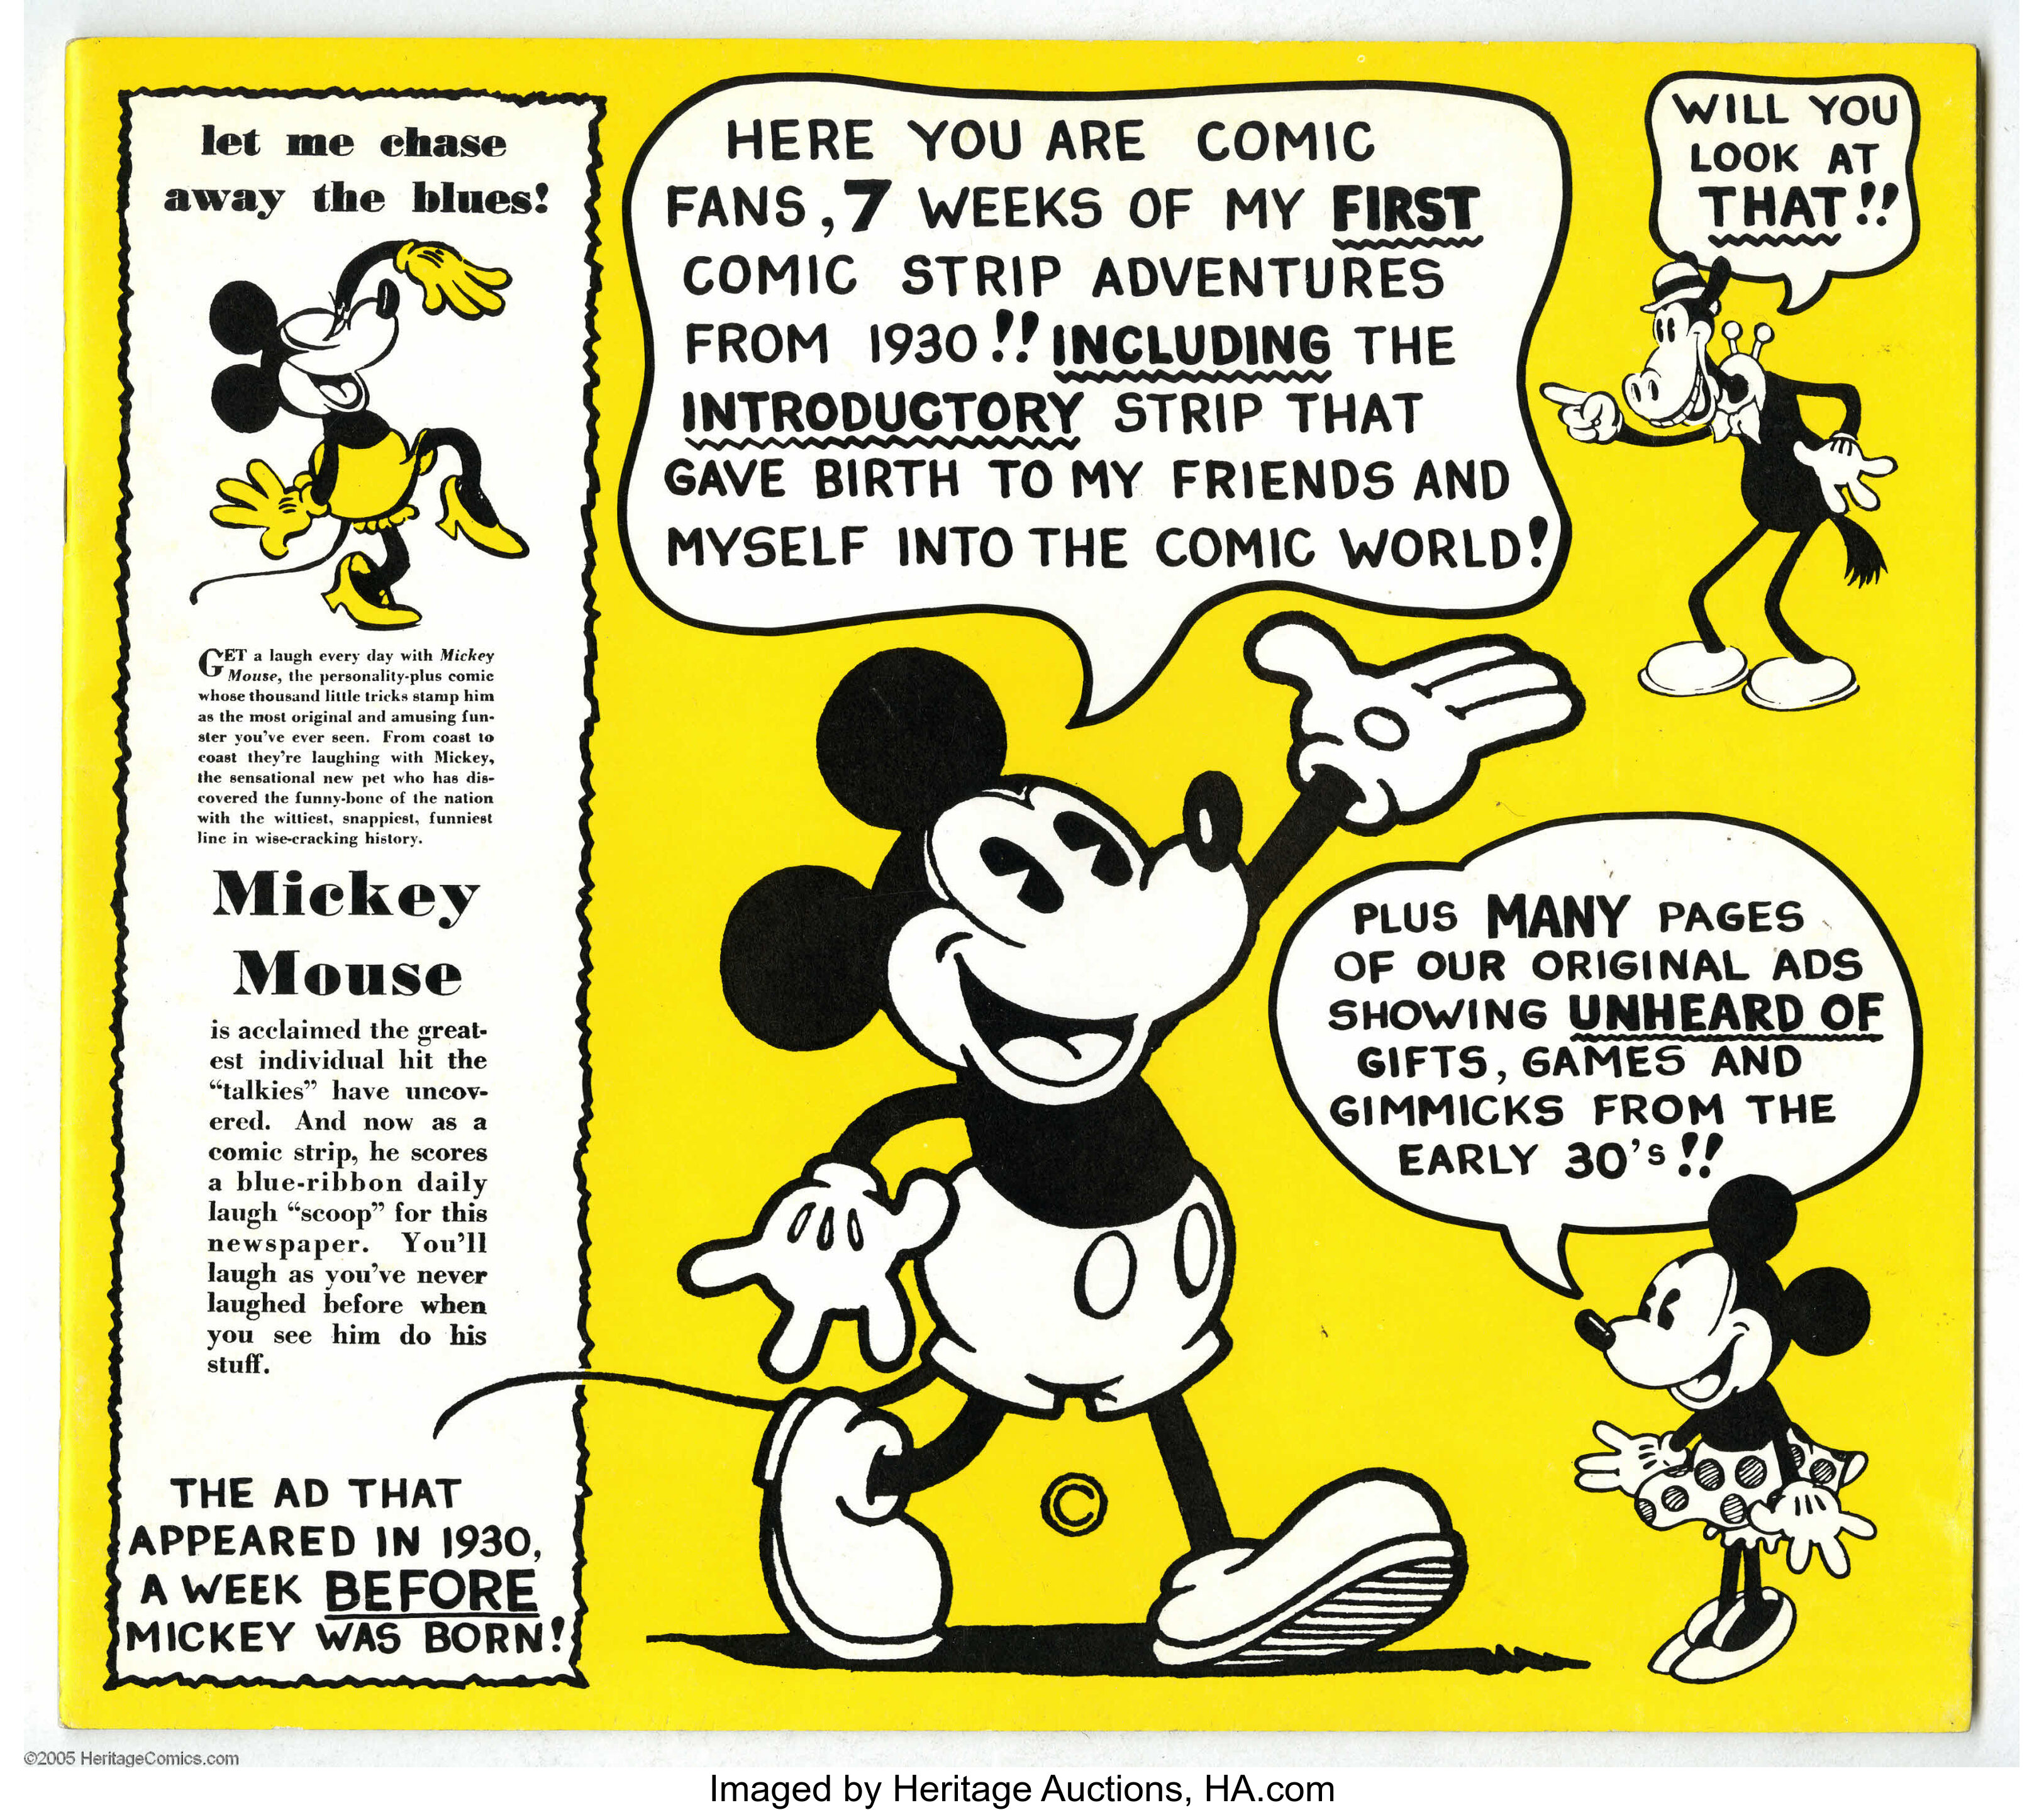 Most people know all about mickey